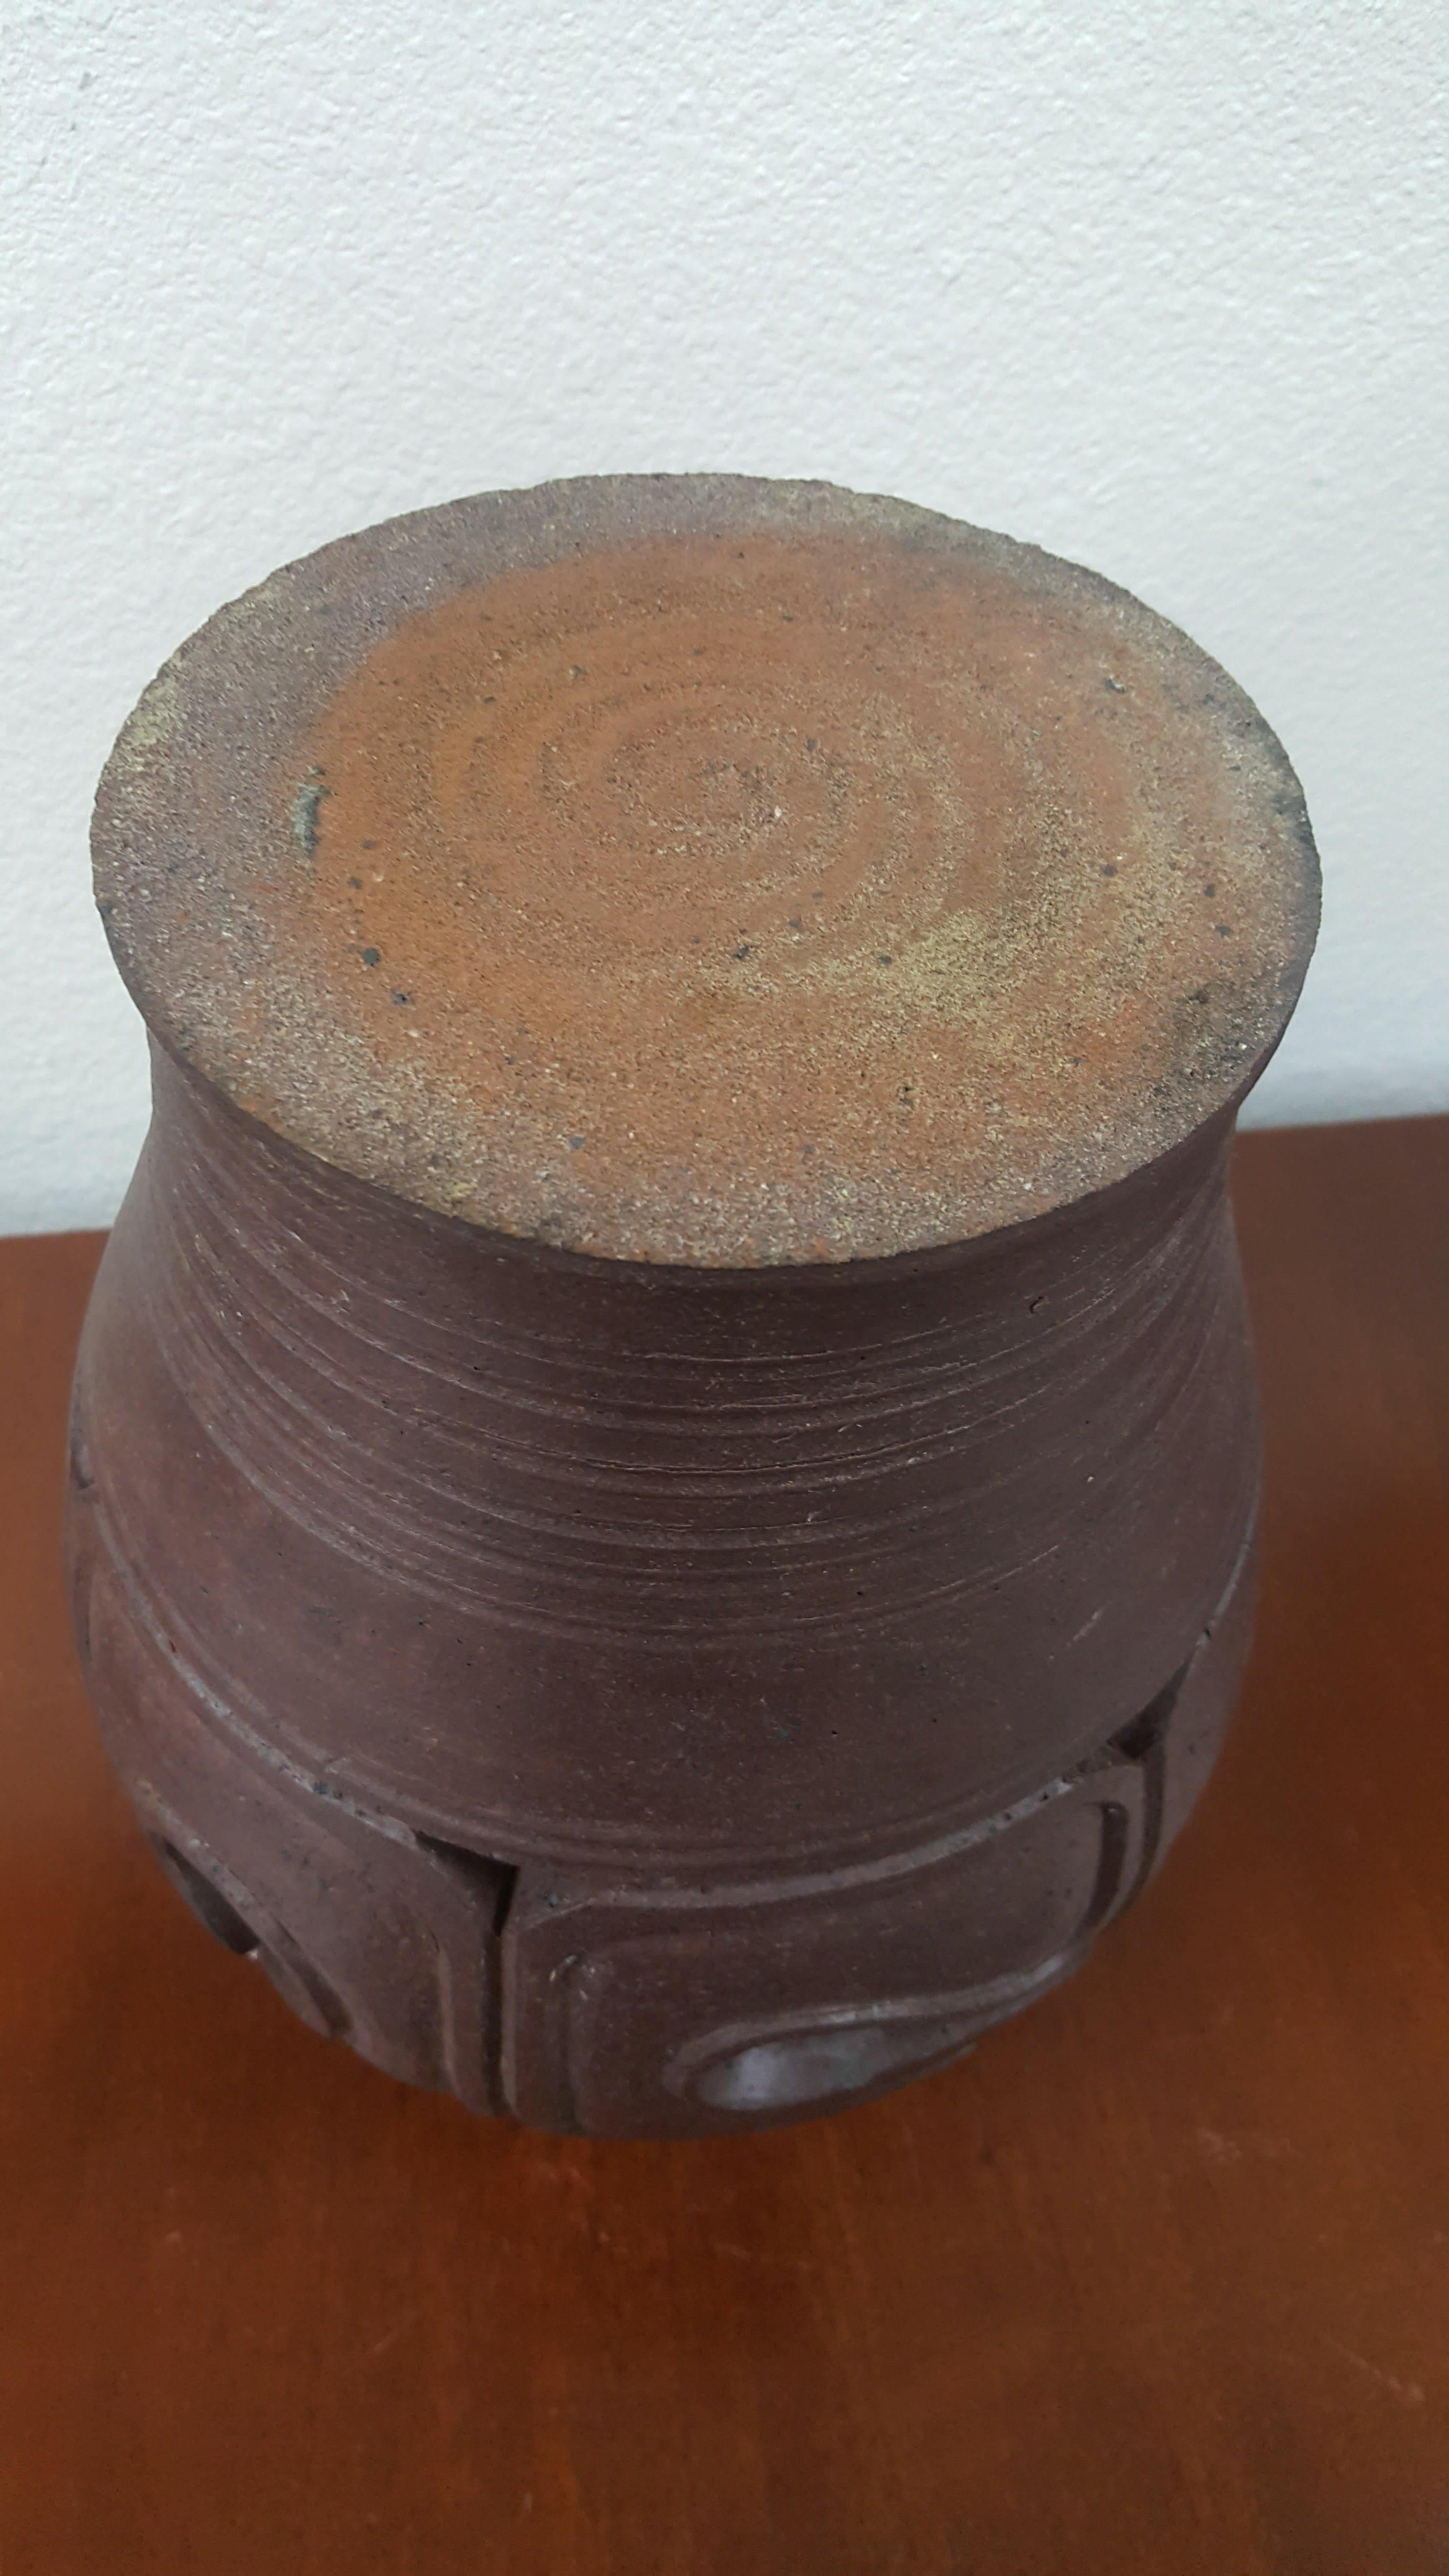 1960s Mid-Century Modern Stoneware Vase or Jar In Good Condition For Sale In Monrovia, CA